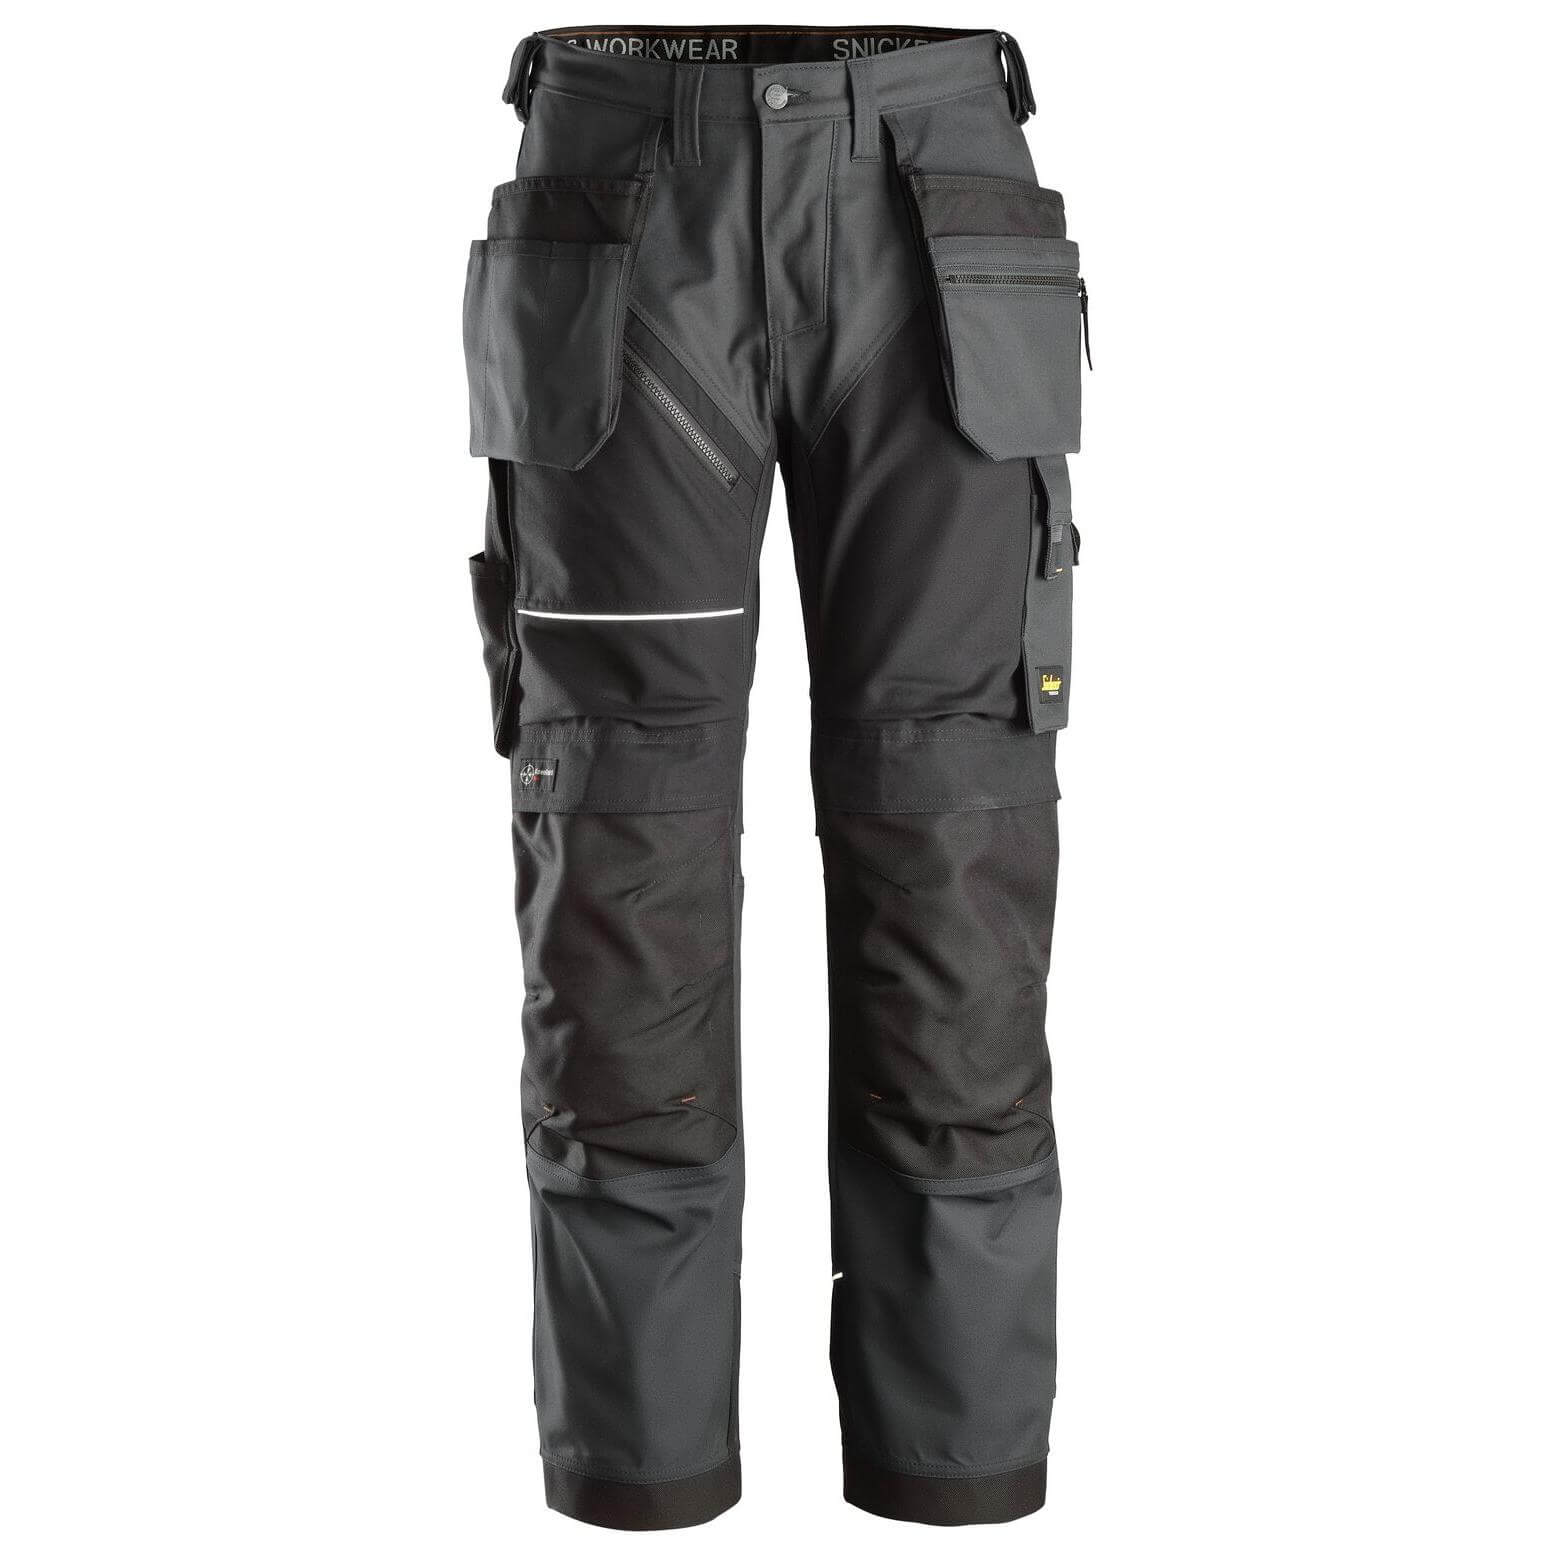 Snickers 6214 Ruffwork Canvas Hard Wearing Work Trousers With Holster Pockets Steel Grey